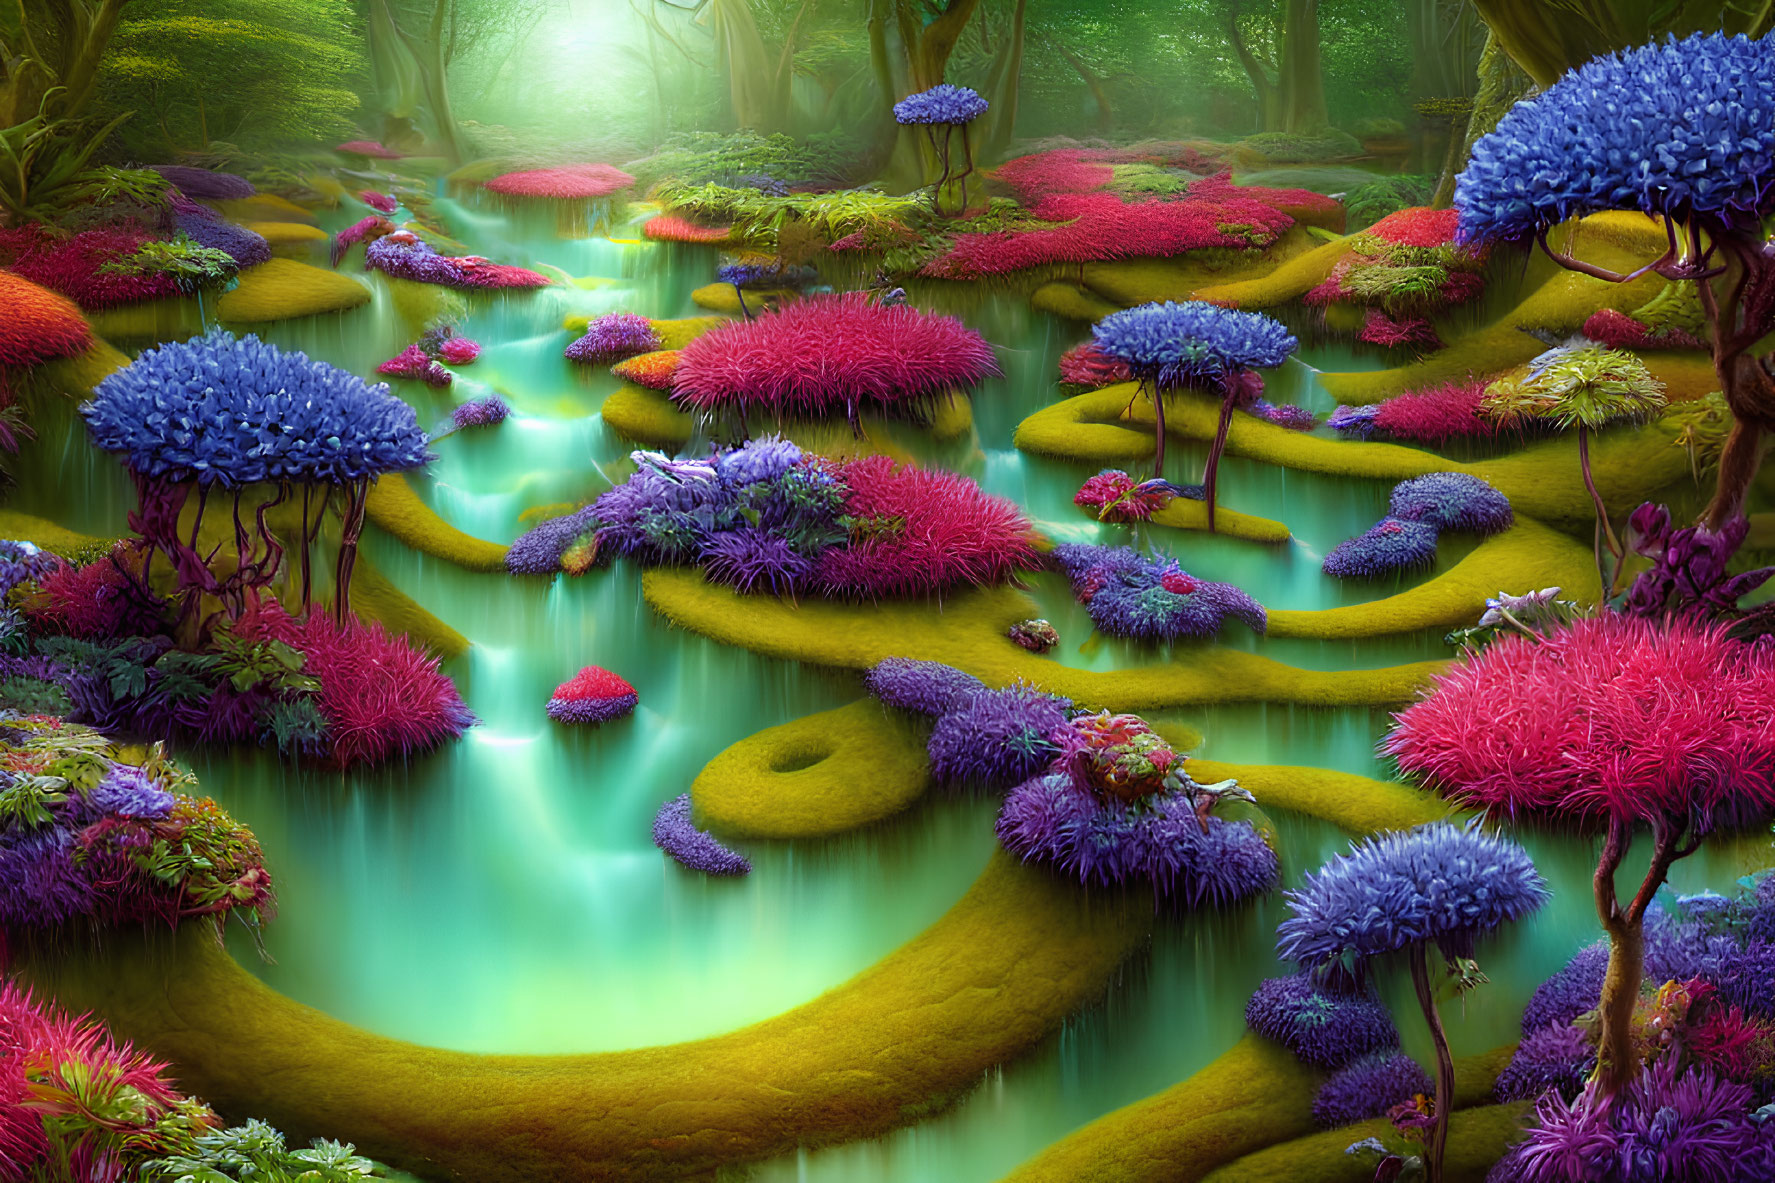 Vibrant mystical forest scene with colorful flora and neon-green rivers